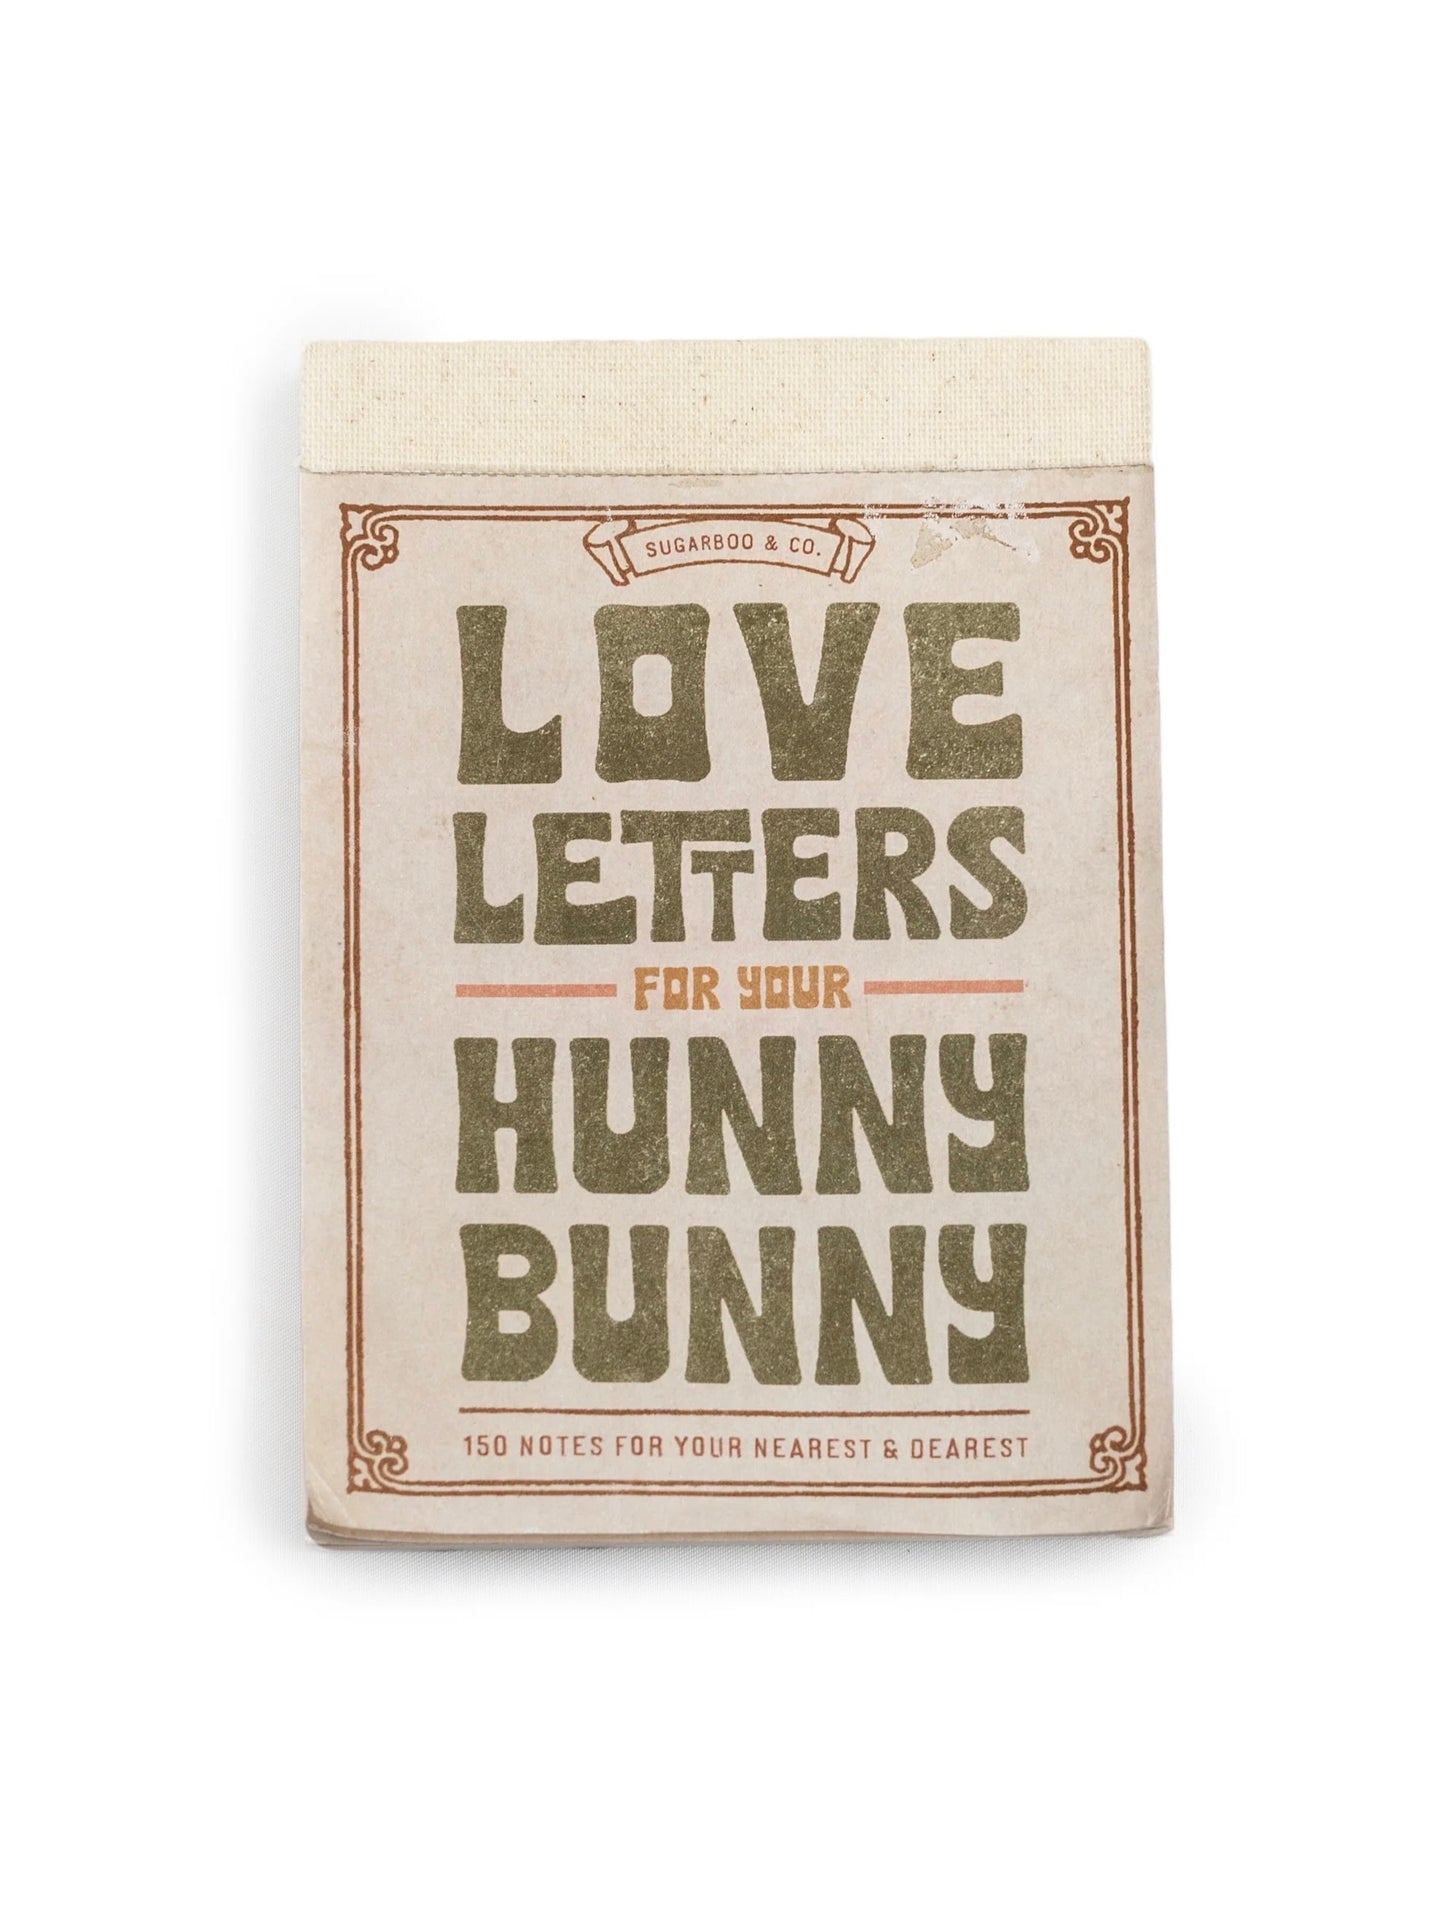 150 Love Letters for your Hunny Bunny